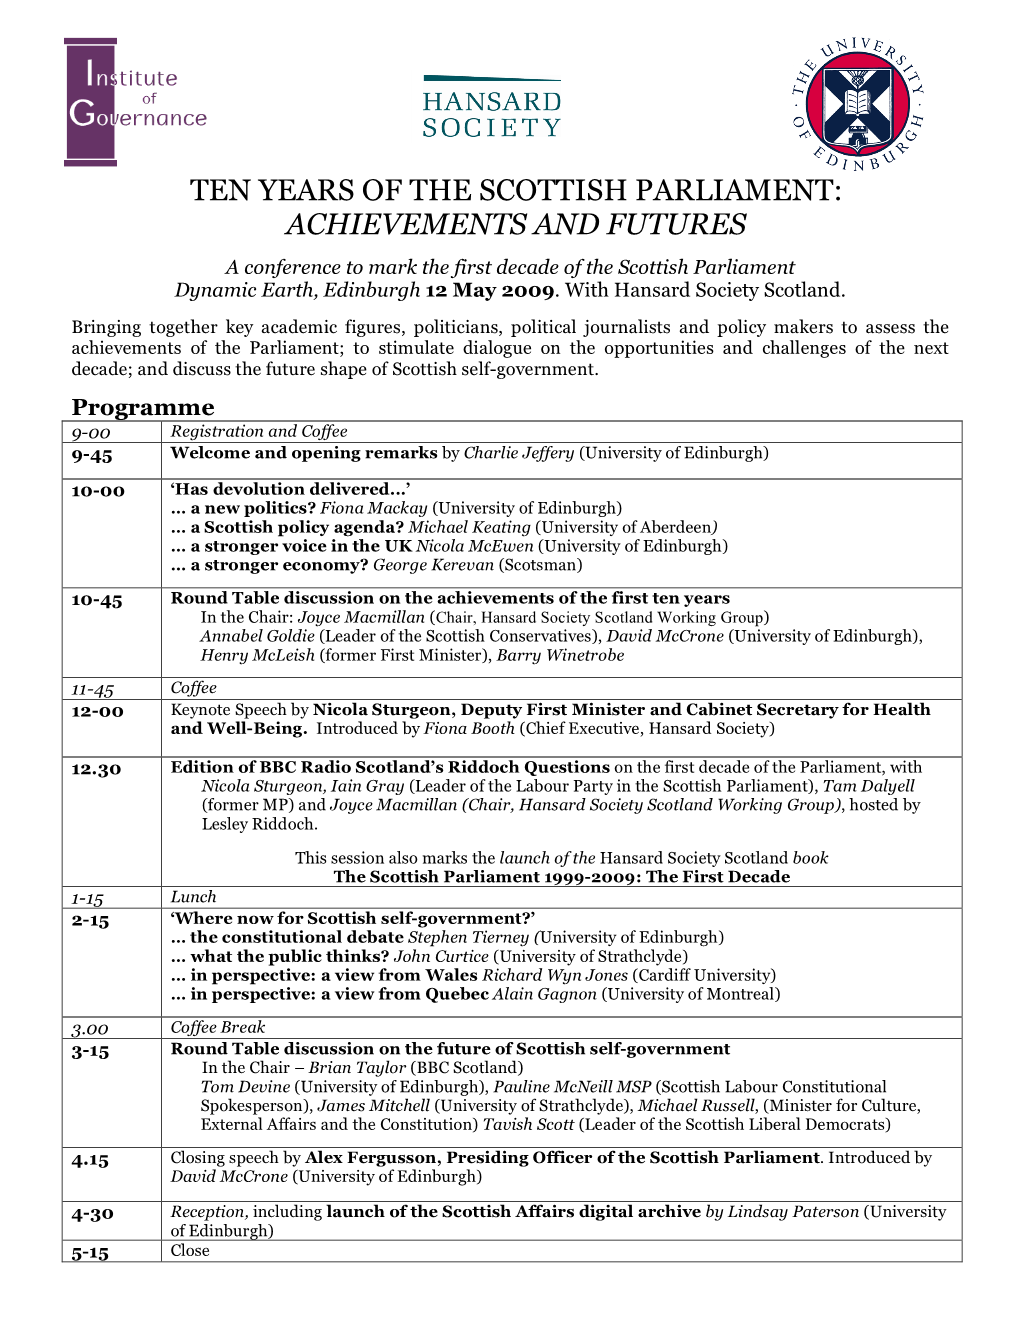 Ten Years of the Scottish Parliament: Achievements and Futures